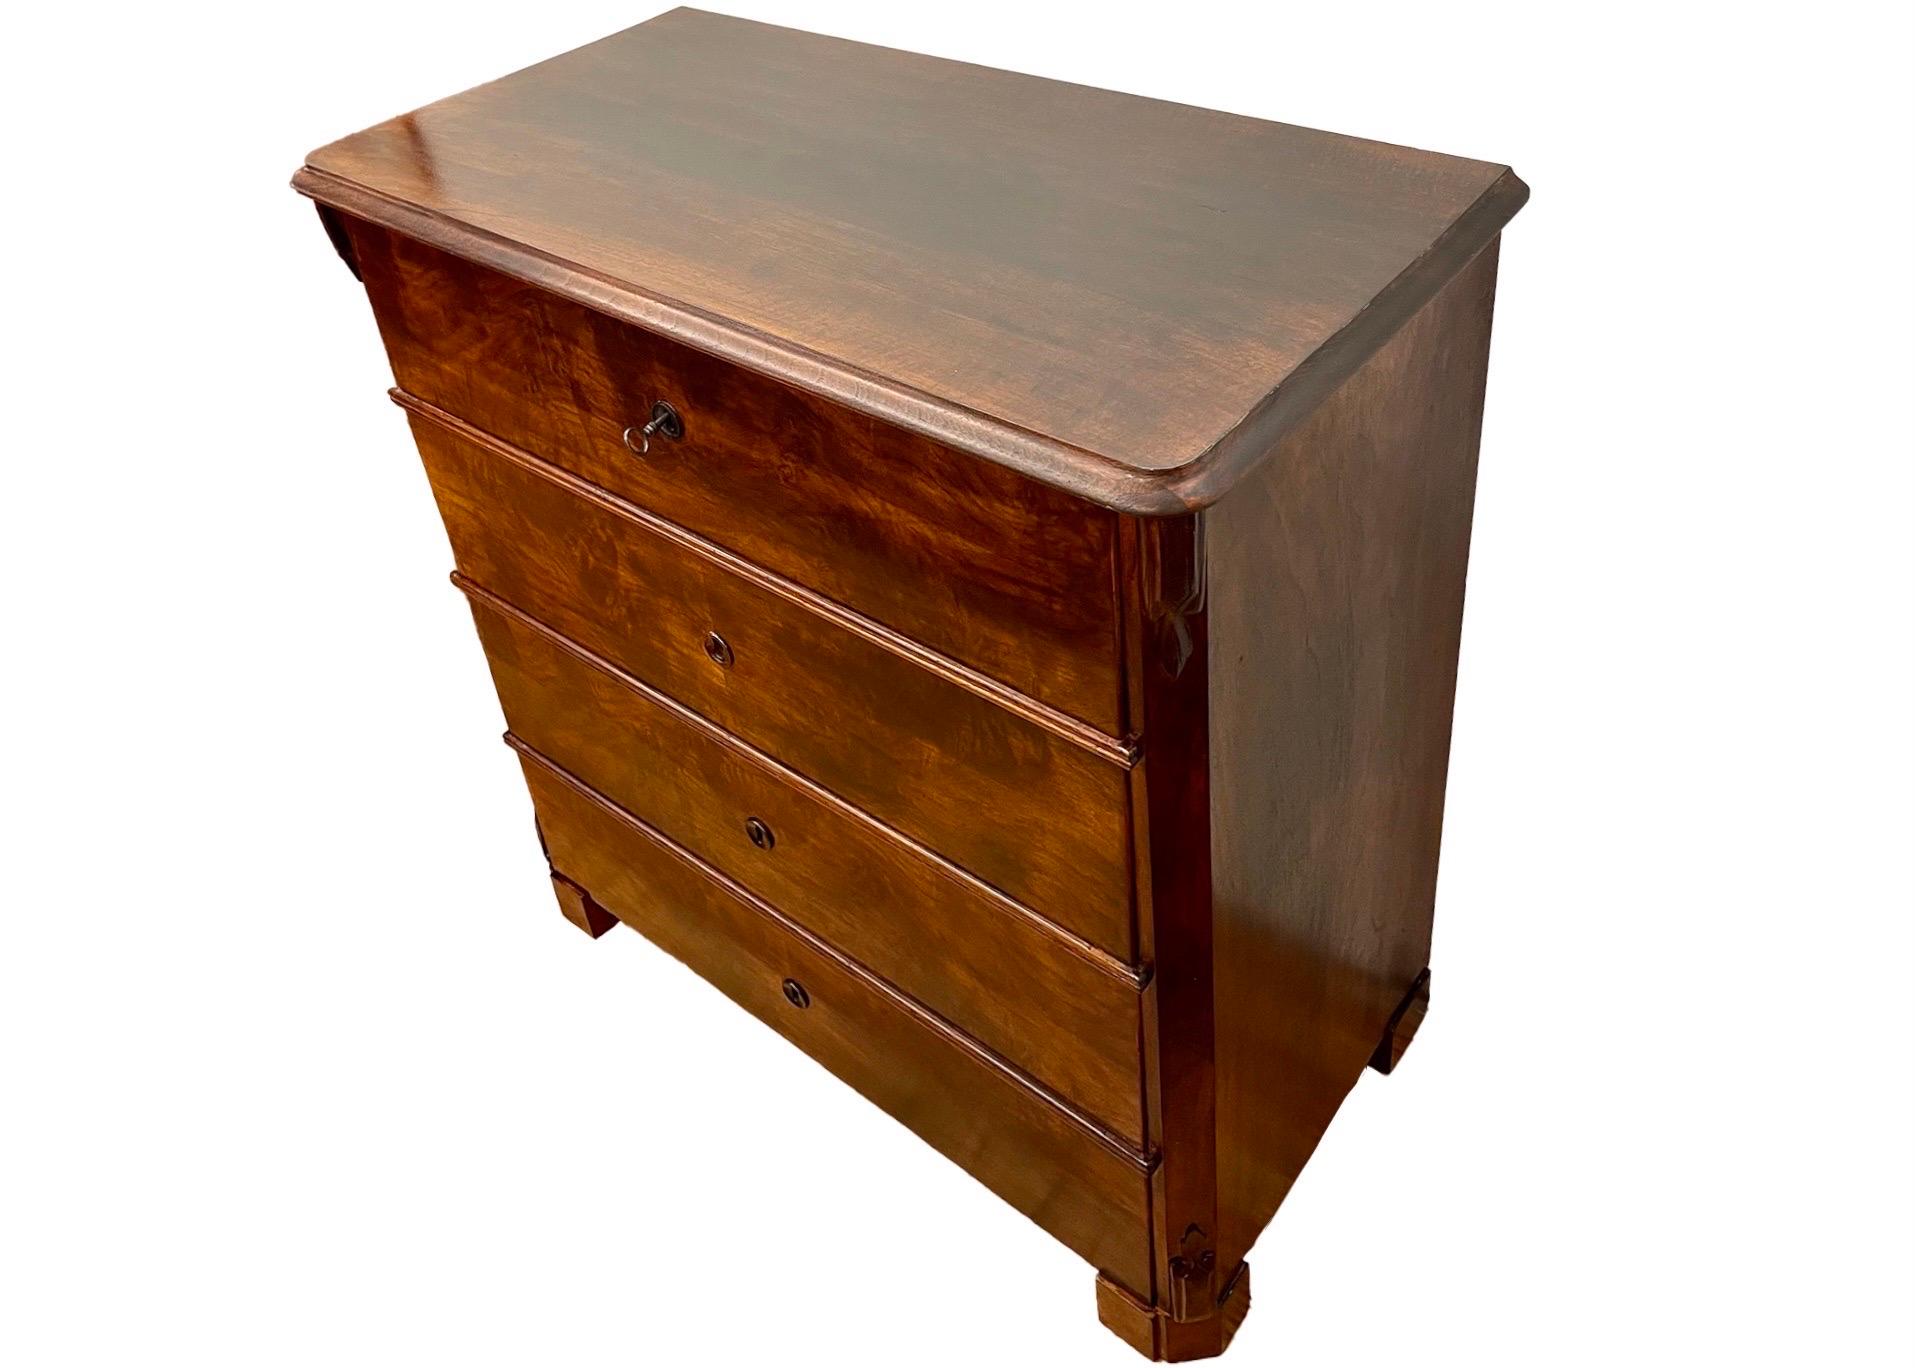 A beautiful and fully functioning dark wood chest of drawers. Book matched veneers adorn the visible faces, and the hand hewn carpentry is visible in the back panel. The drawers slide smoothly and all four locks open with the same original key.